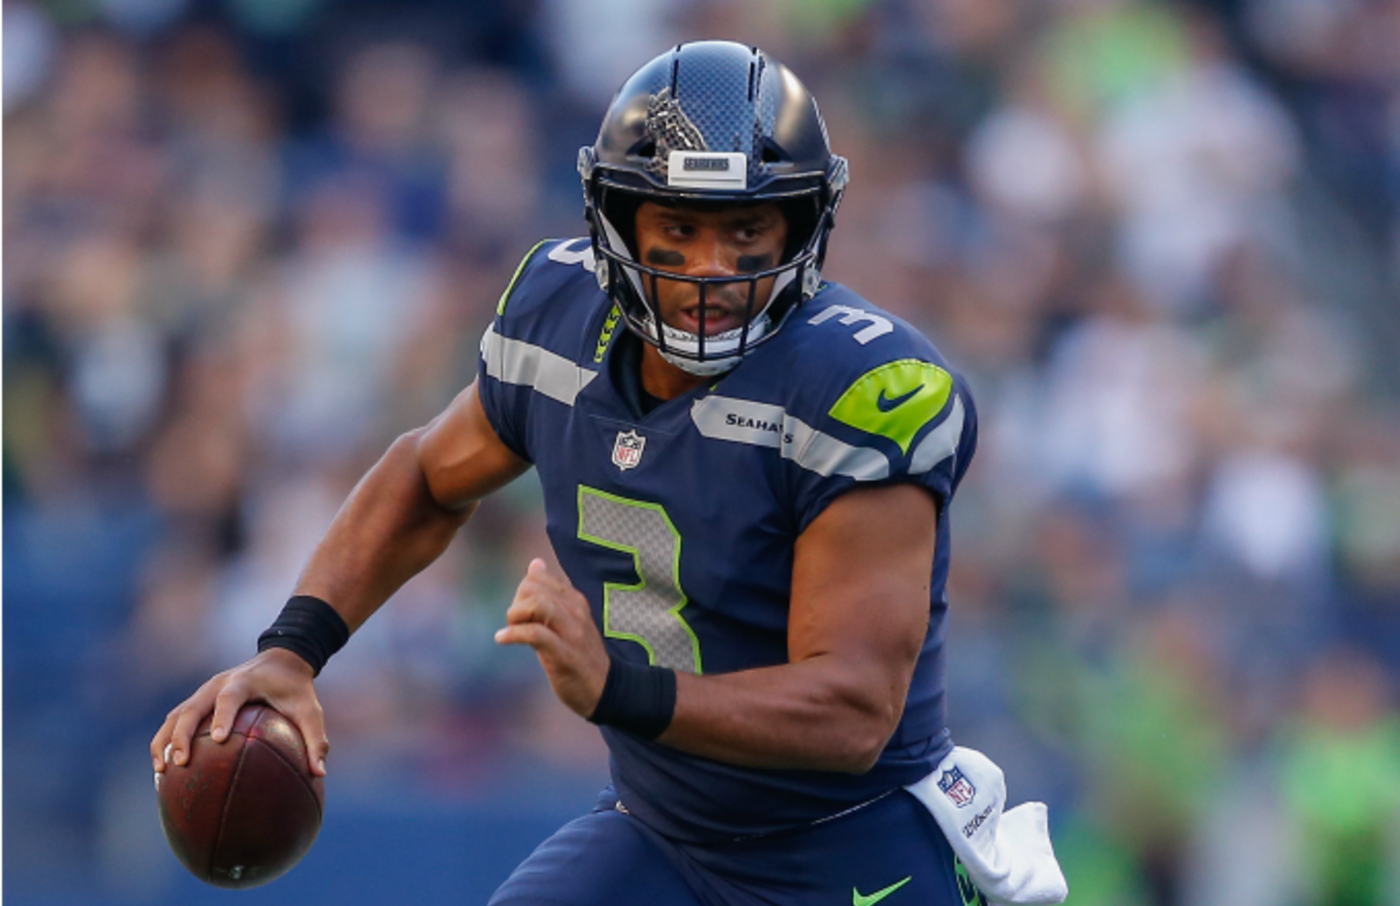 Quarterback Russell Wilson #3 of the Seattle Seahawks